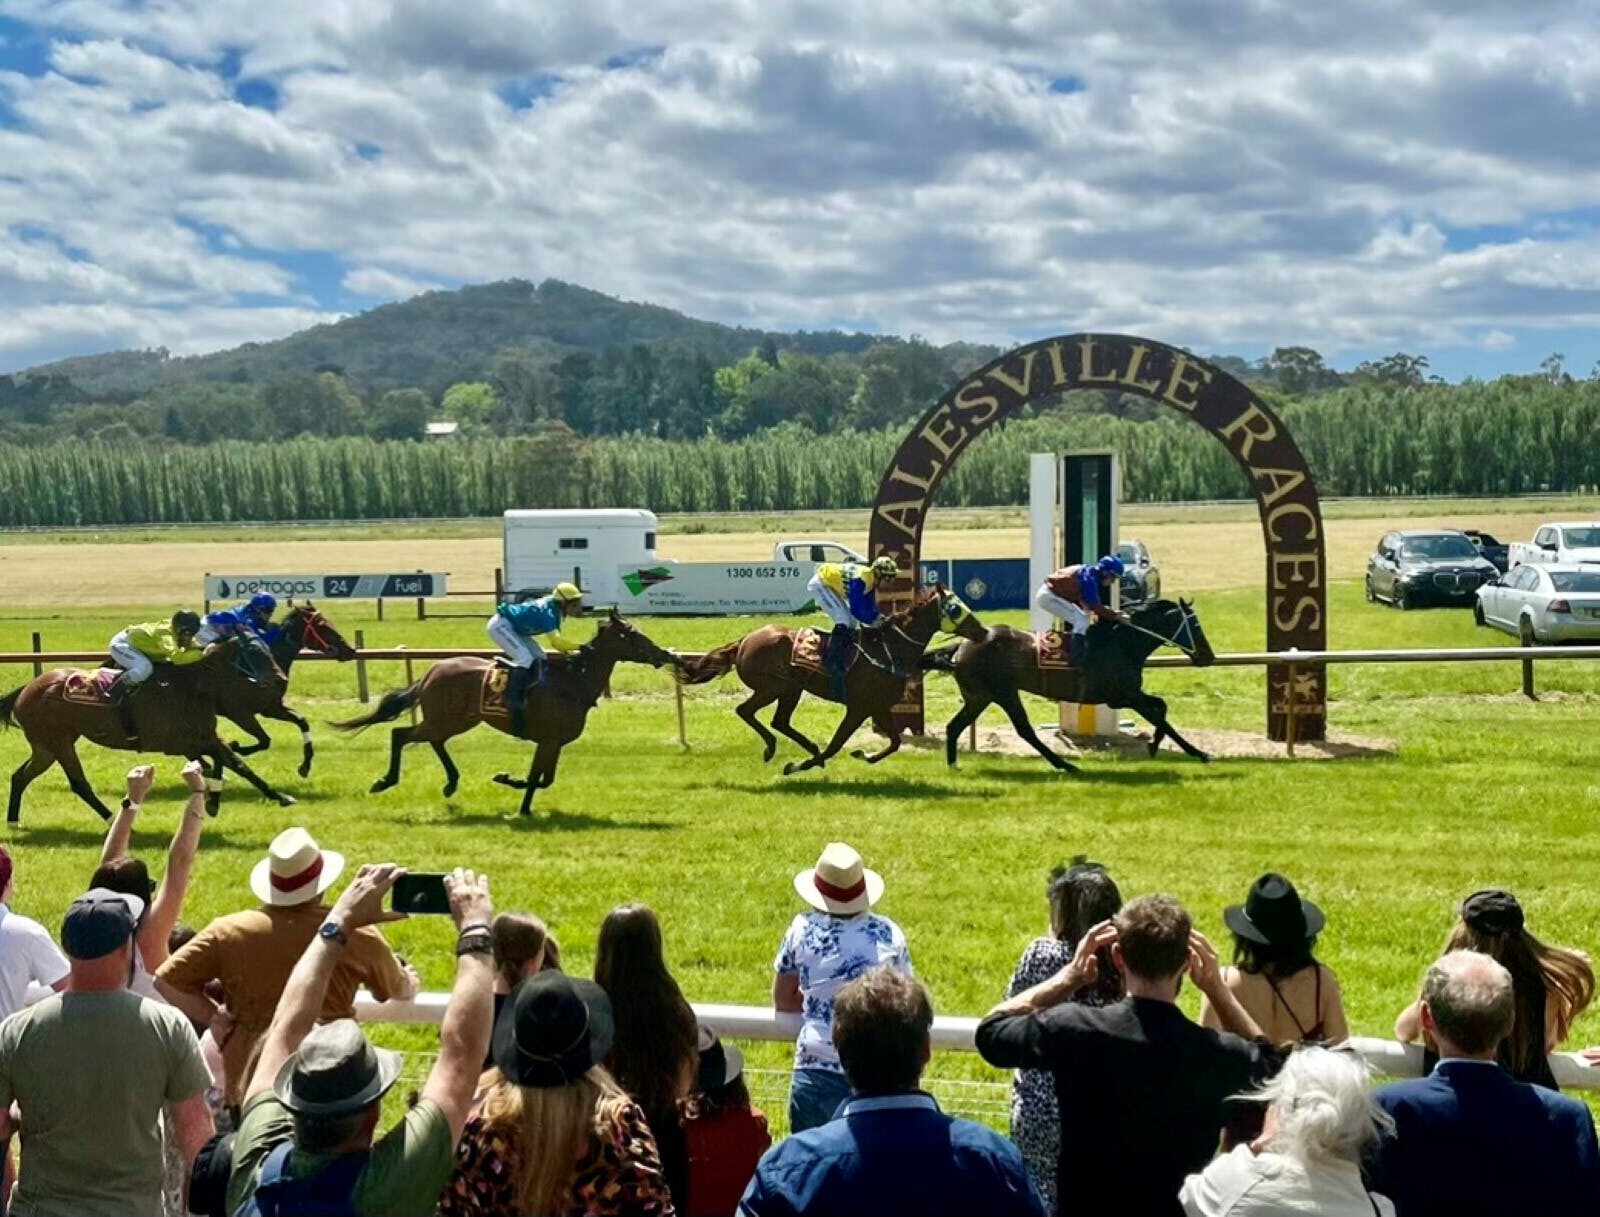 Winning Post at the Healesville Races